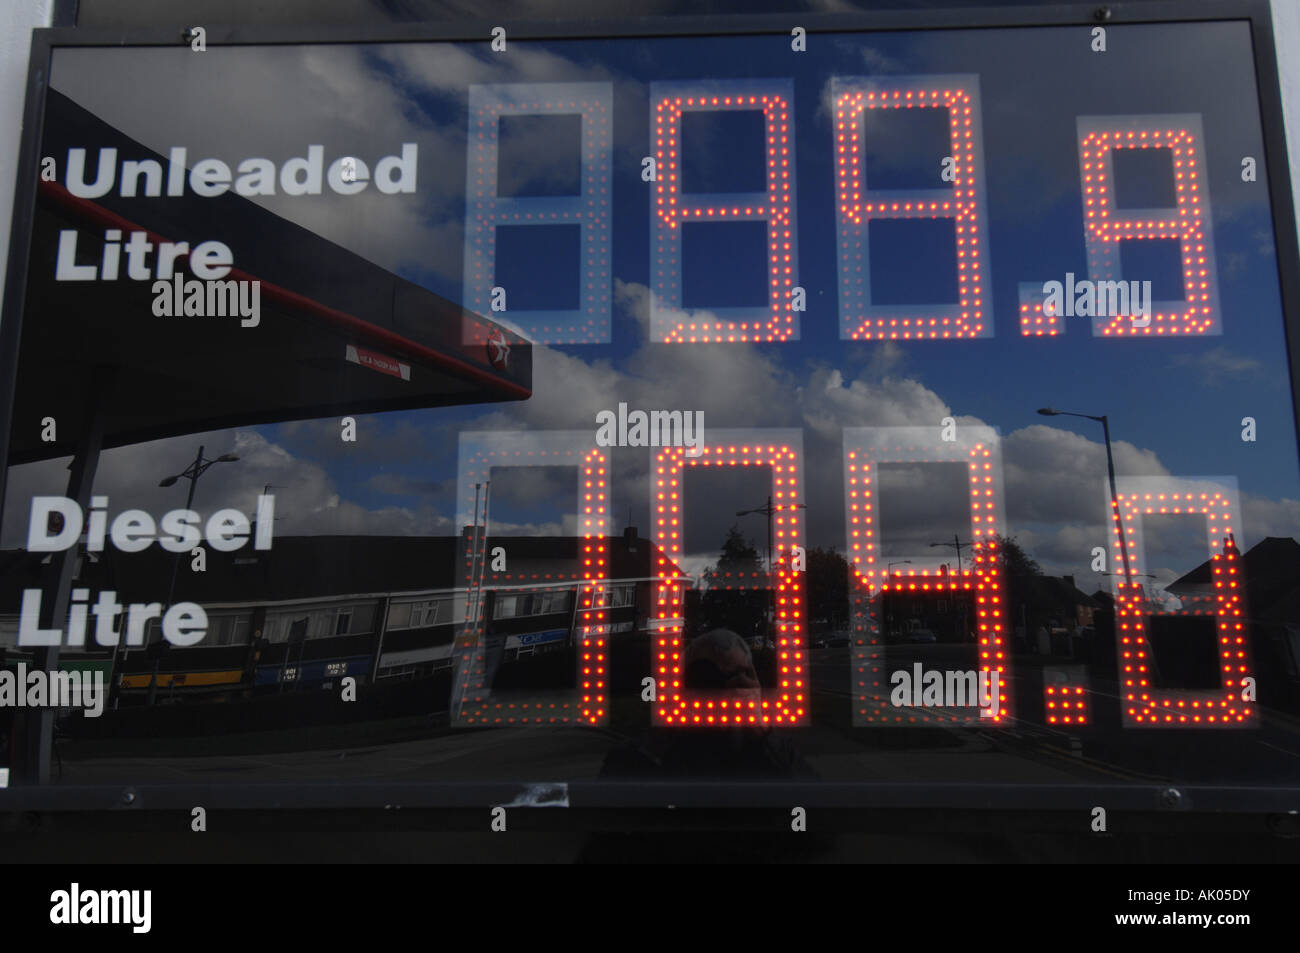 Fuel prices displayed on petrol pumps at 99.8p petrol and 89p diesel Stock Photo